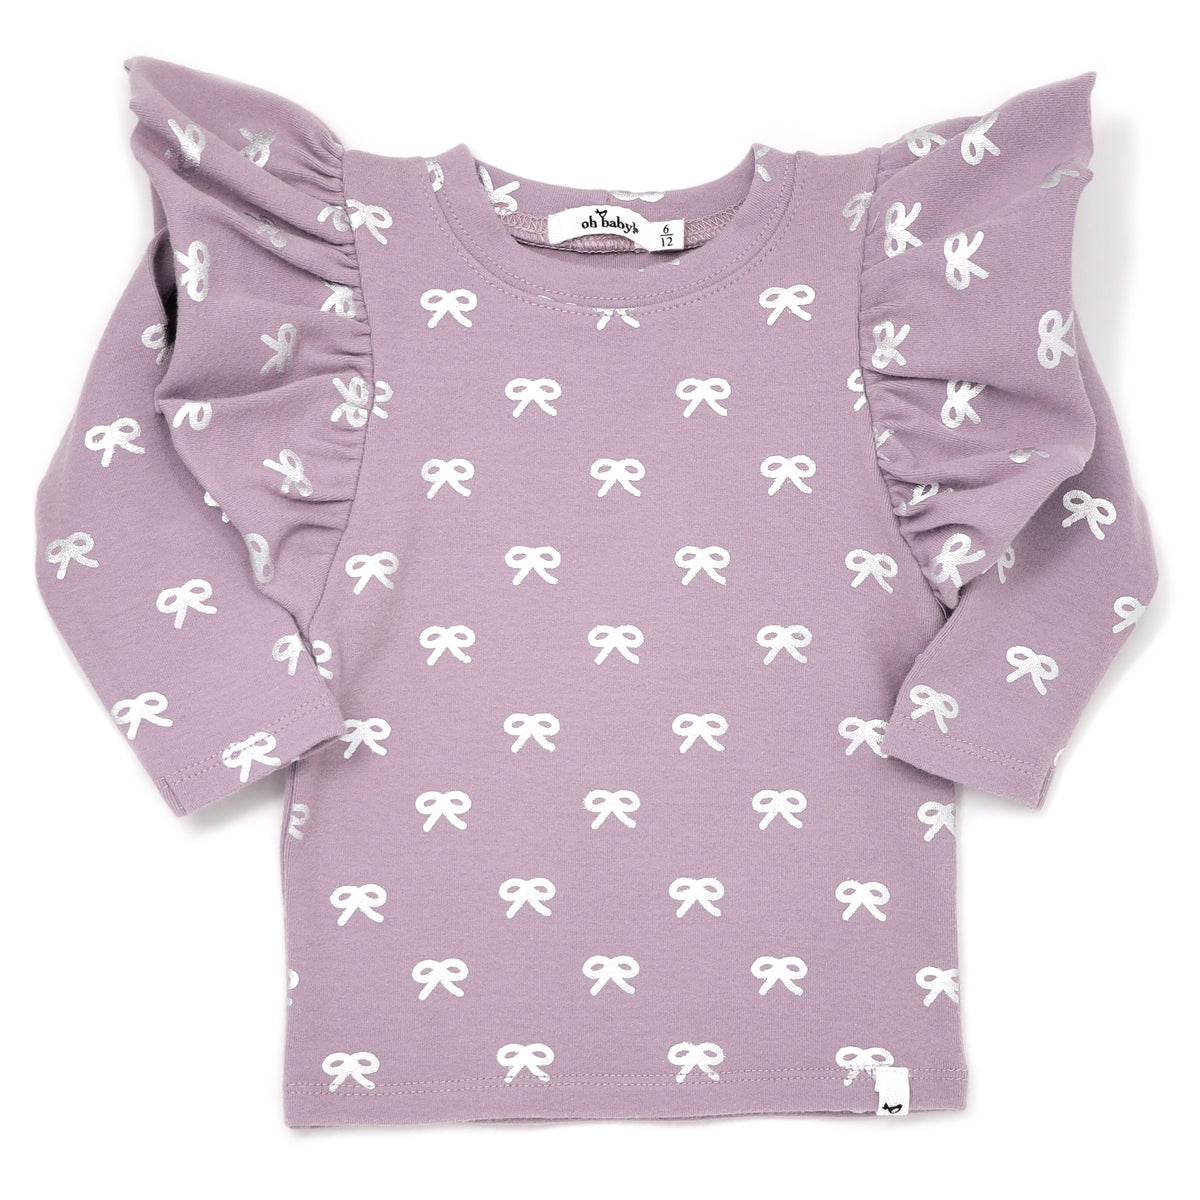 oh baby! Silver Bows Butterfly Sleeve Long Sleeve Tee - Dusty Lavender